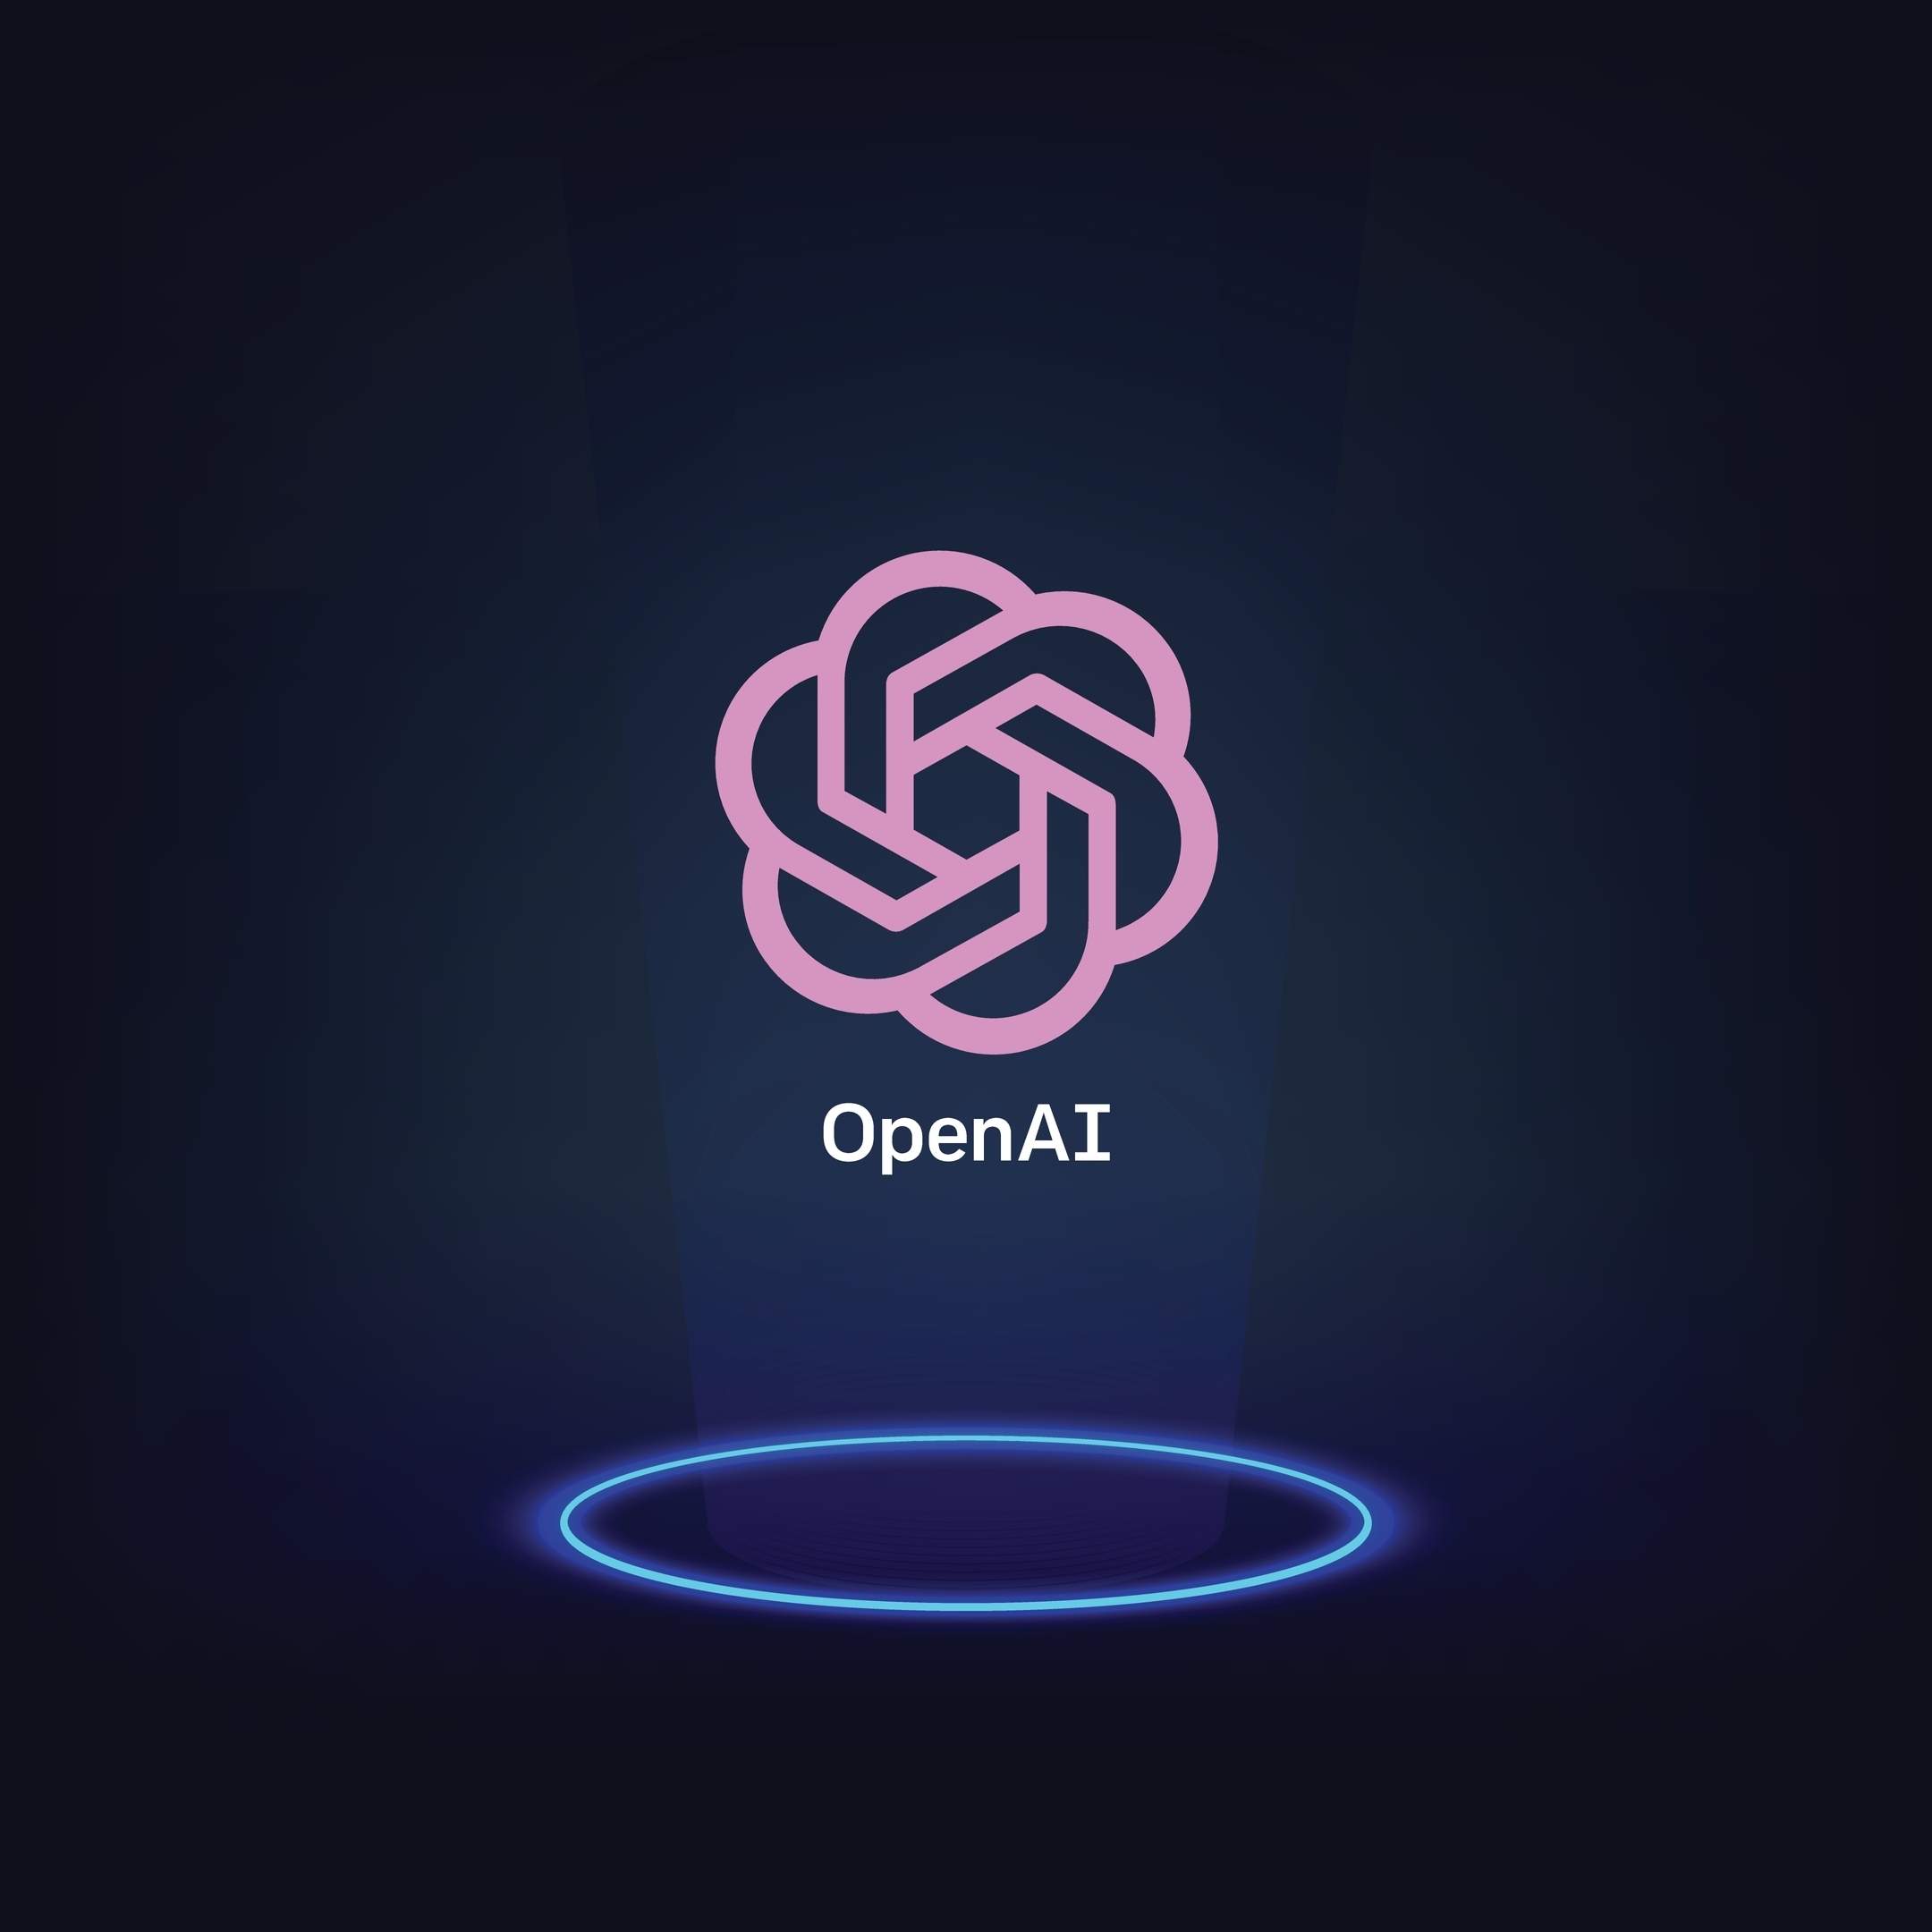 Want to invest in a partner company of OpenAI?